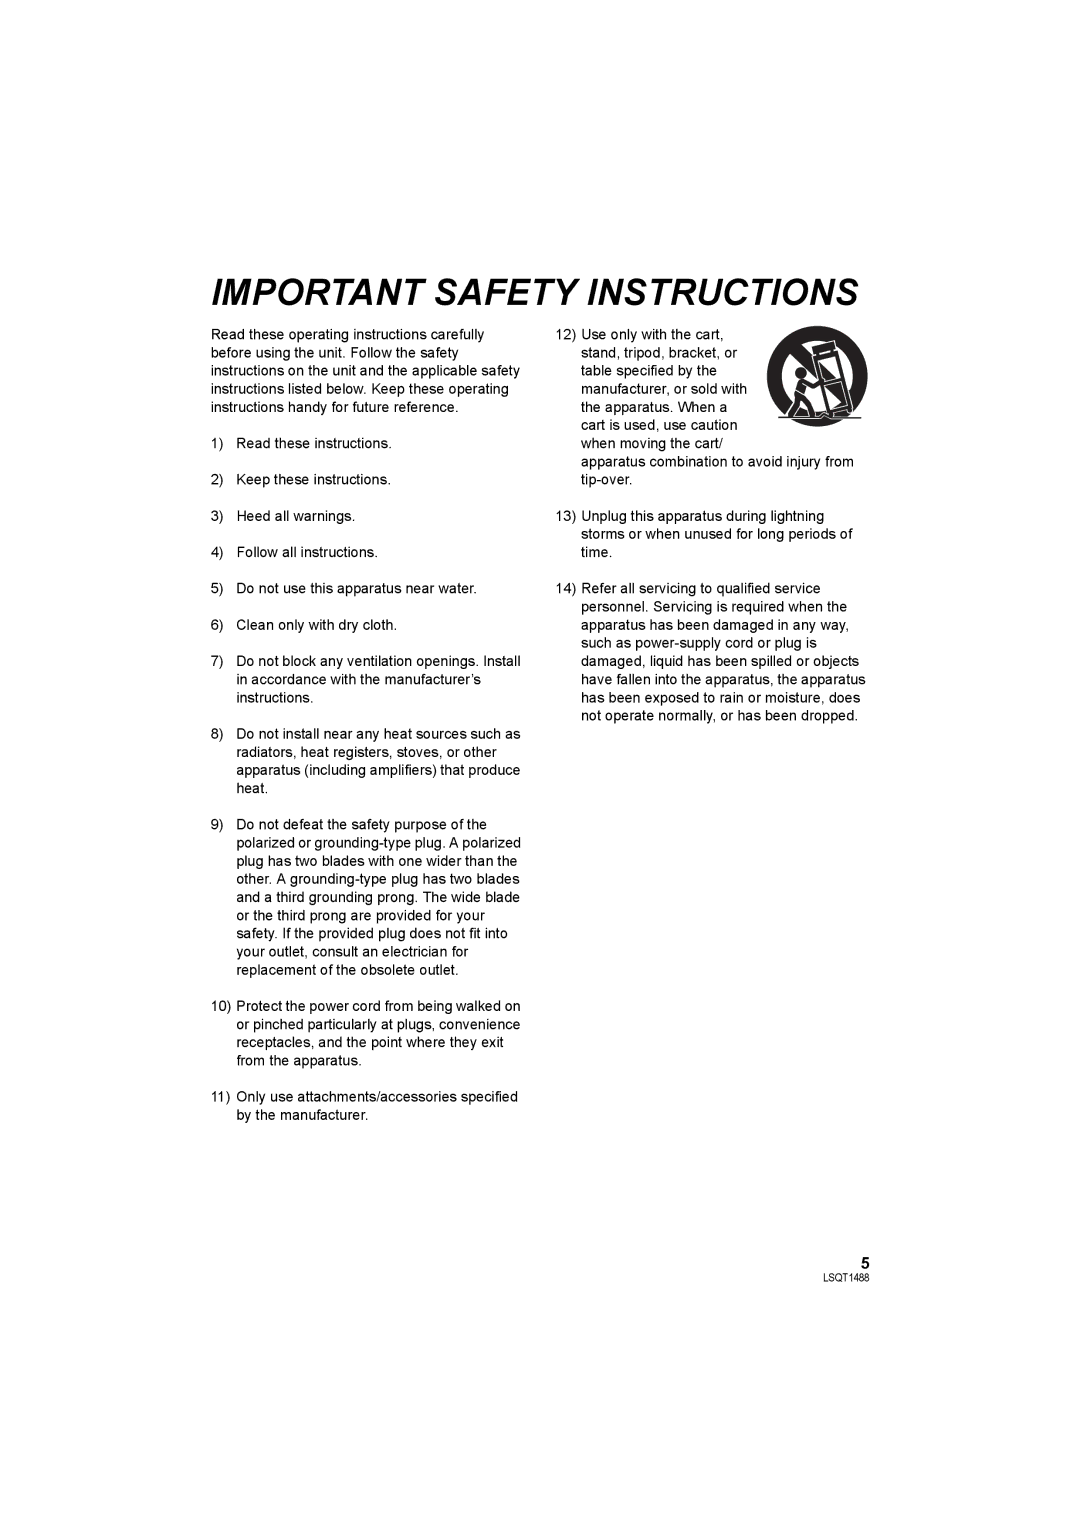 Panasonic SDR-S26PC operating instructions Important Safety Instructions 